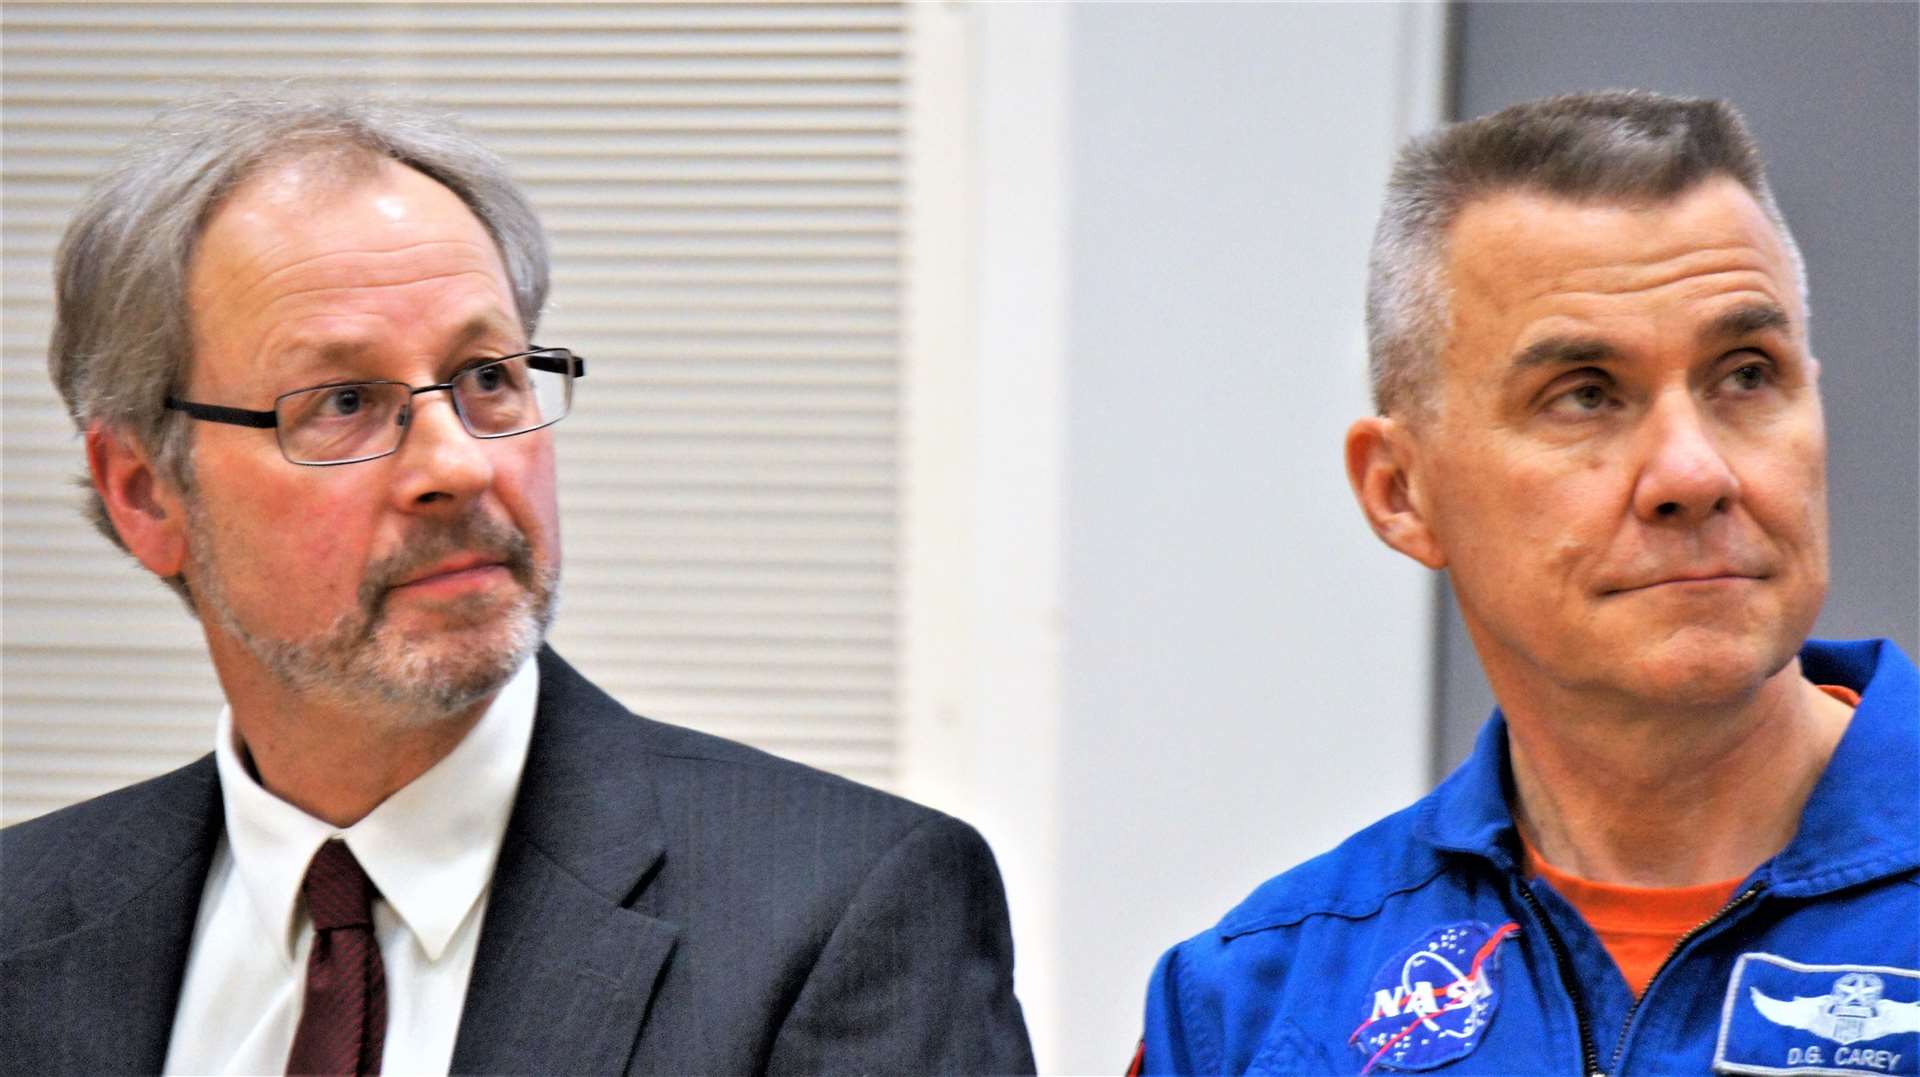 Professor Iain Baikie, left, with astronaut Duane Carey at the Science Festival in 2018. Picture: DGS